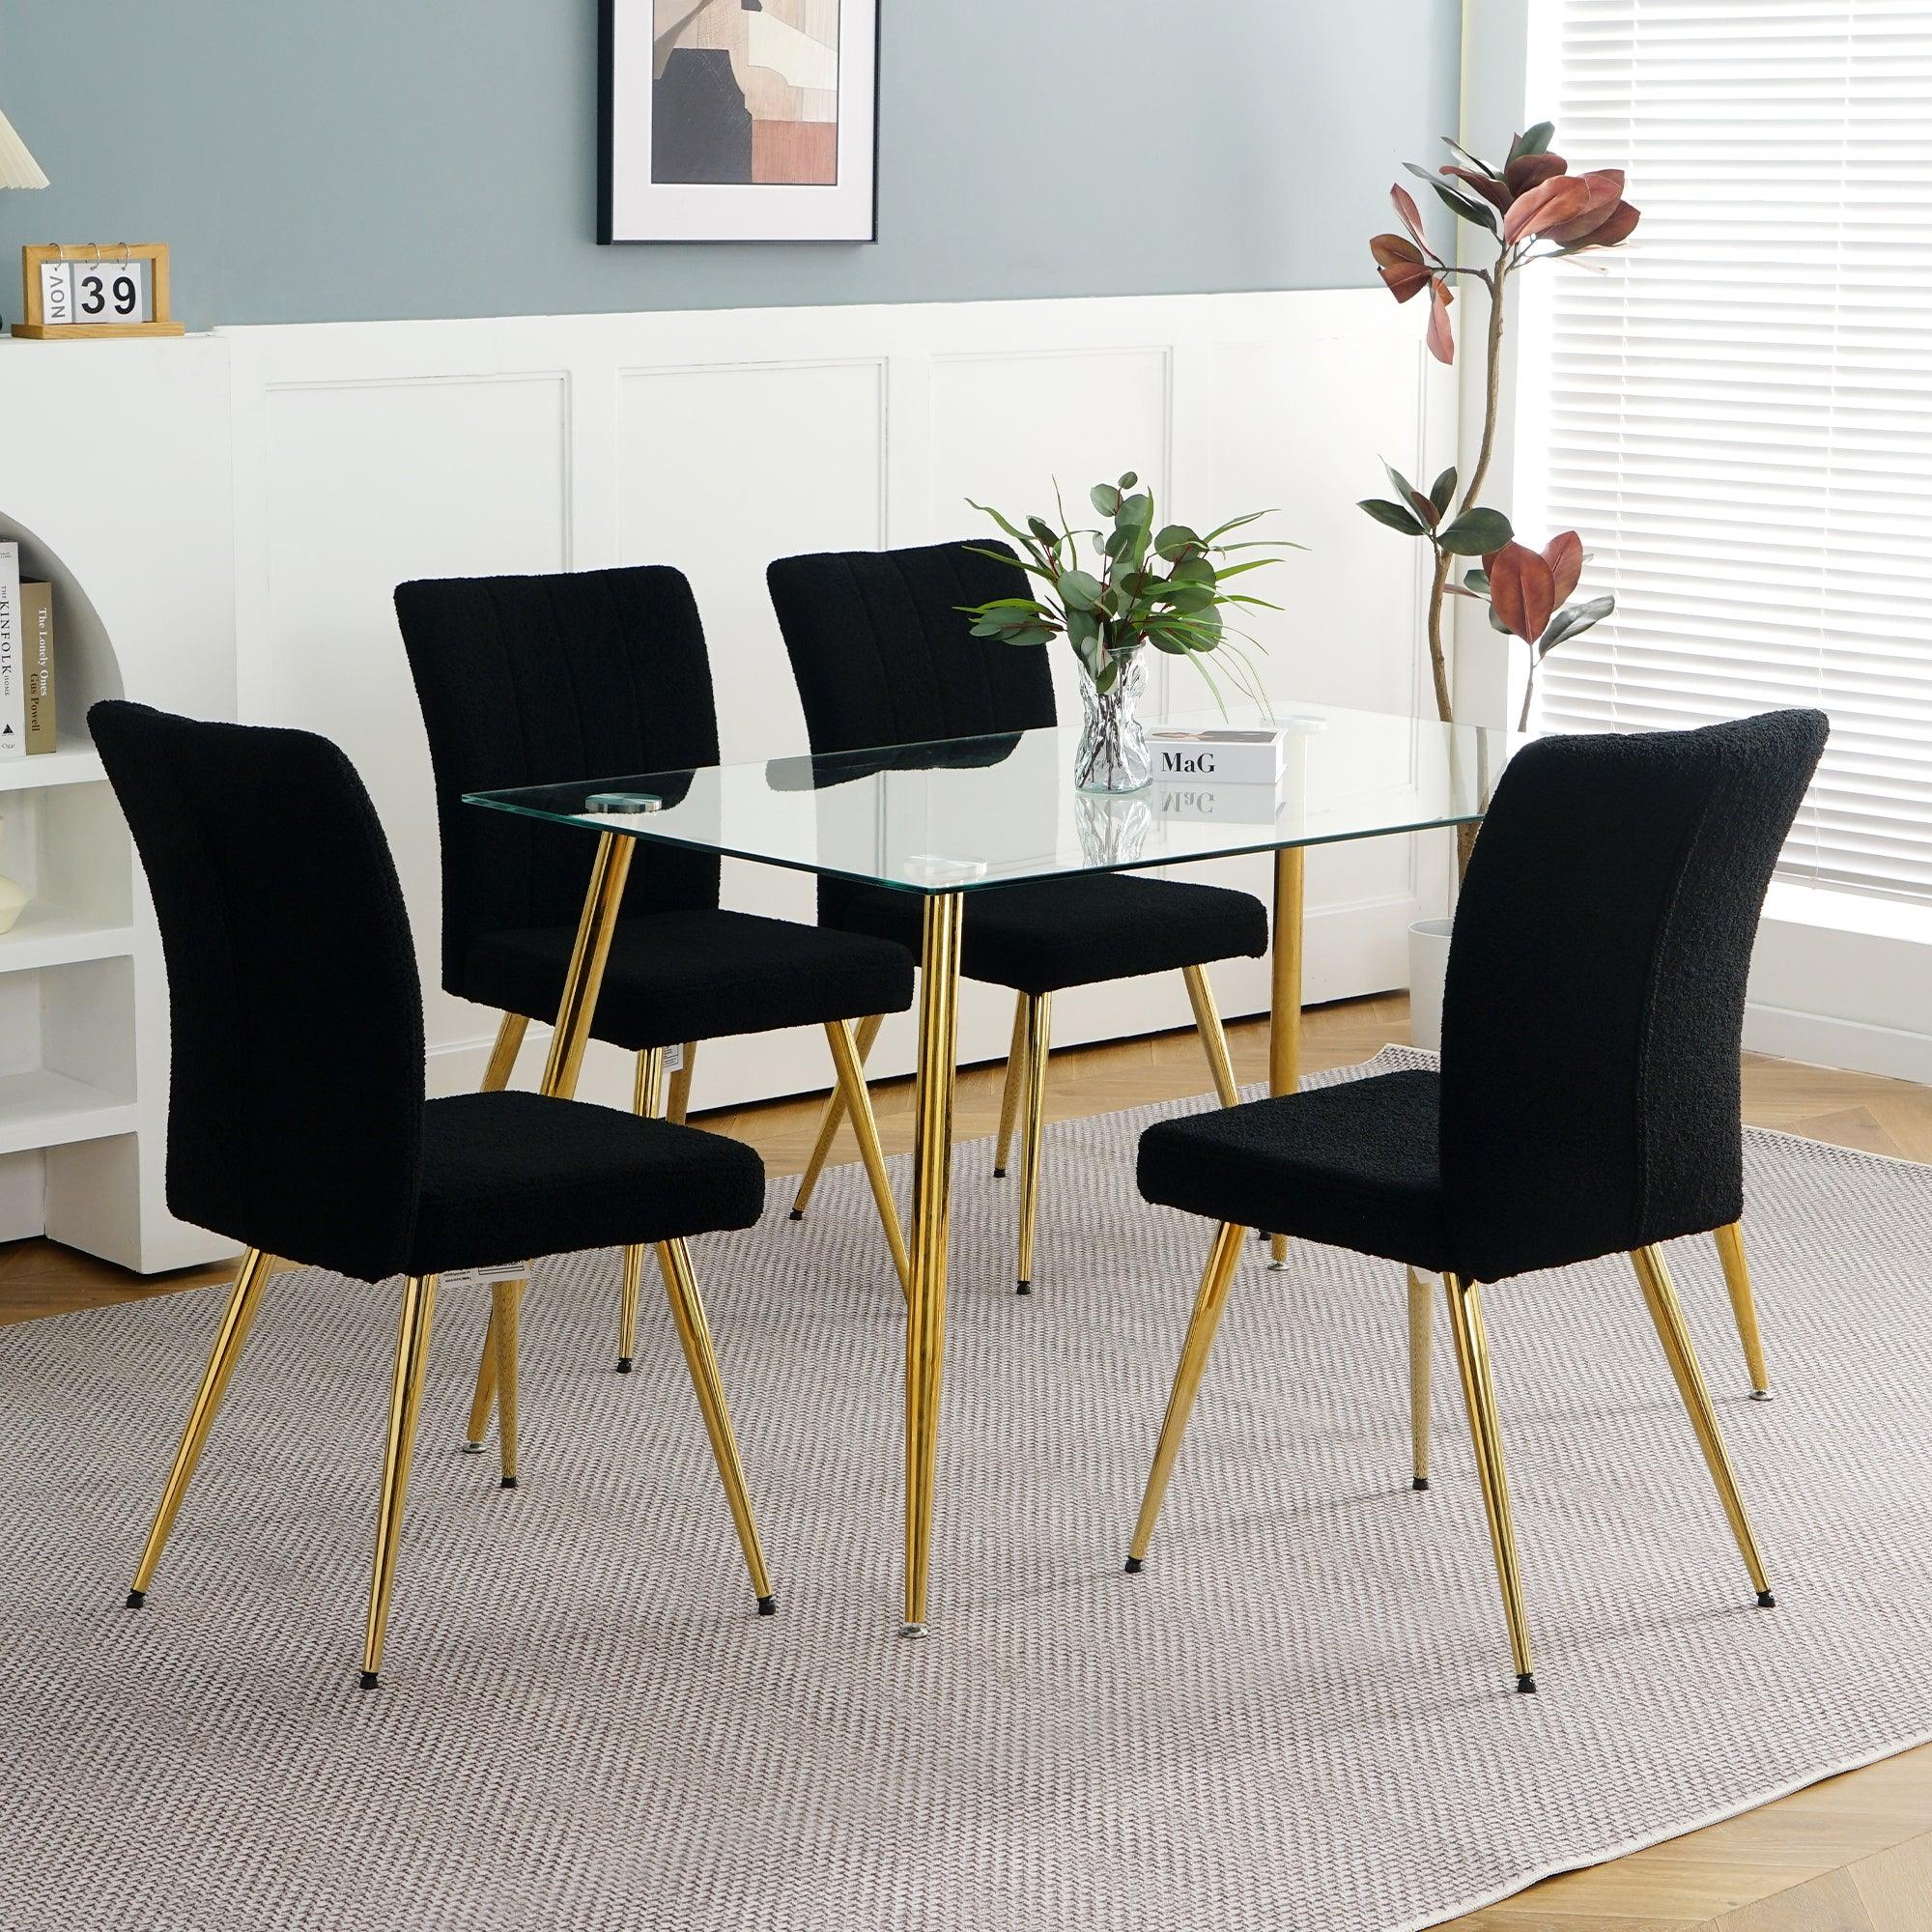 🆓🚛 Set Of 4 Modern Teddy Wool Dining Chairs, Upholstered Chair With Fabric Accent Side Chair With Gold-Plated Metal Legs for Family Furniture Living Room, Bedroom, Kitchen, Dining Room, Black